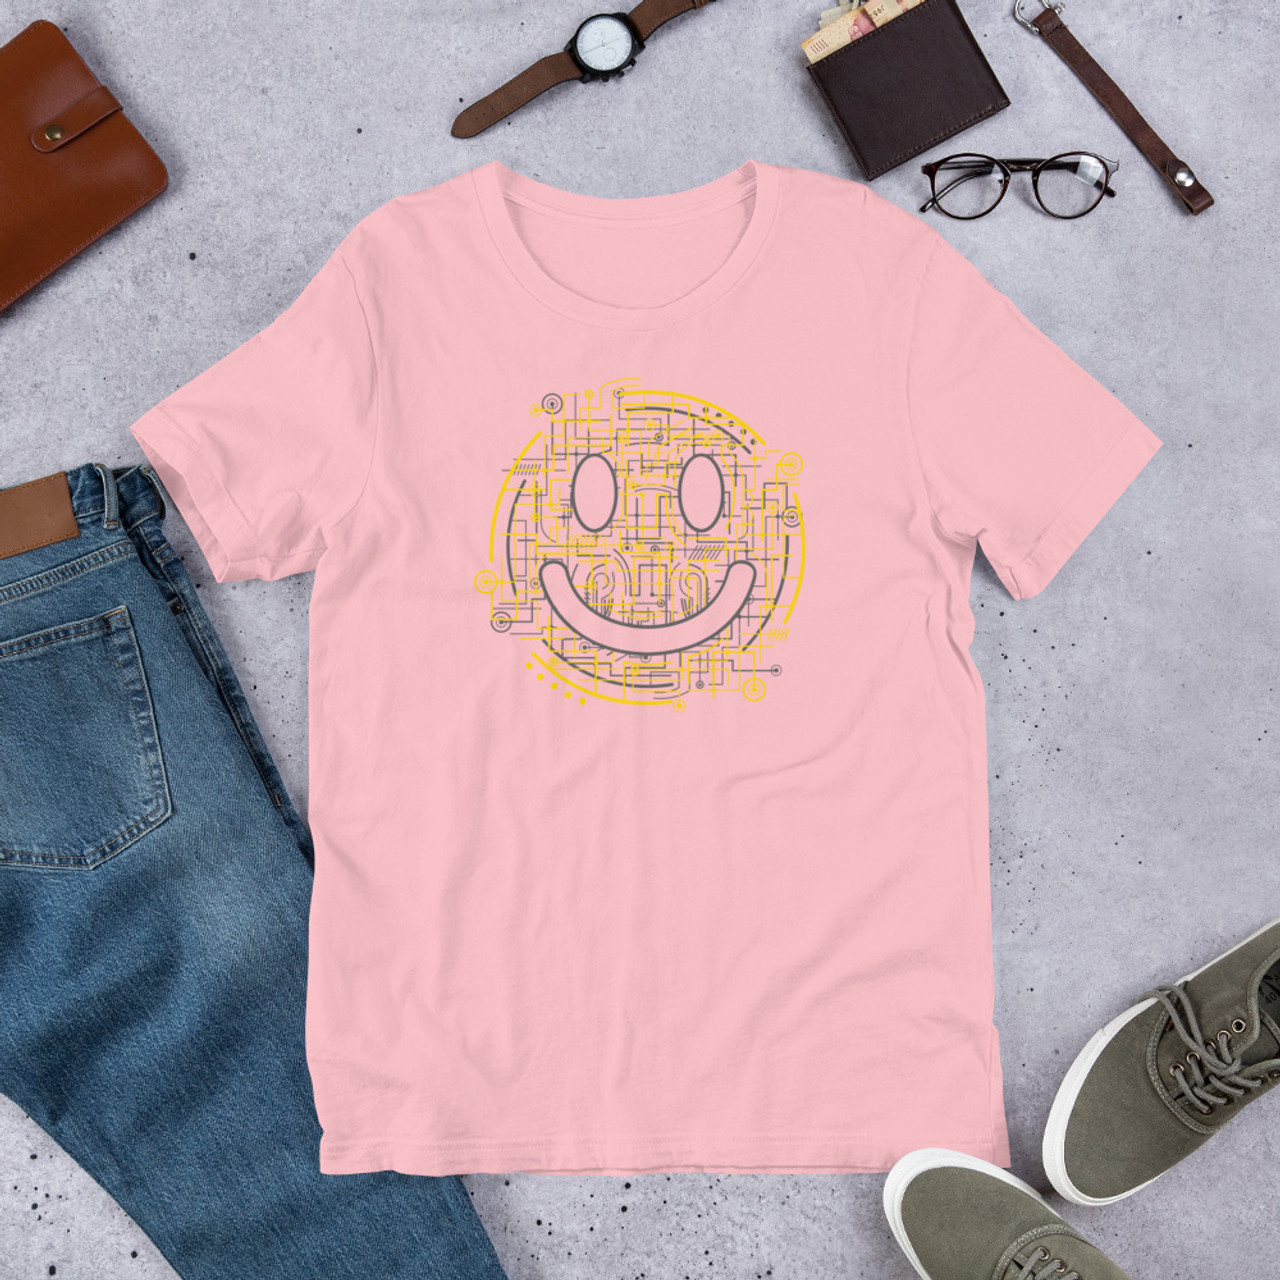 Pink T-Shirt - Bella + Canvas 3001 Electric Smile